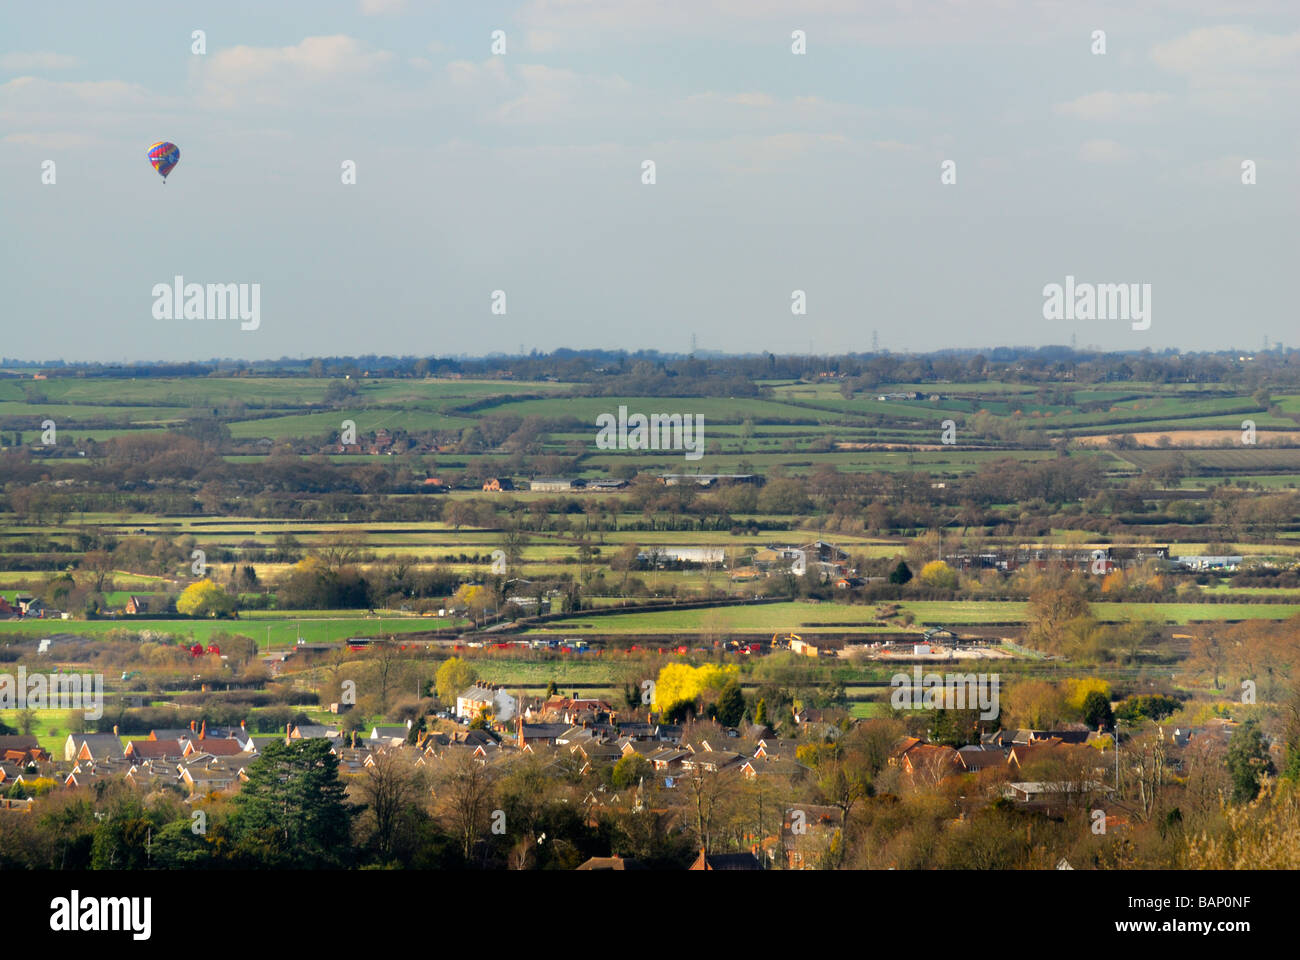 Hot air balloon over the Chiltern hills countryside near Aylesbury and Aston Clinton England UK Stock Photo